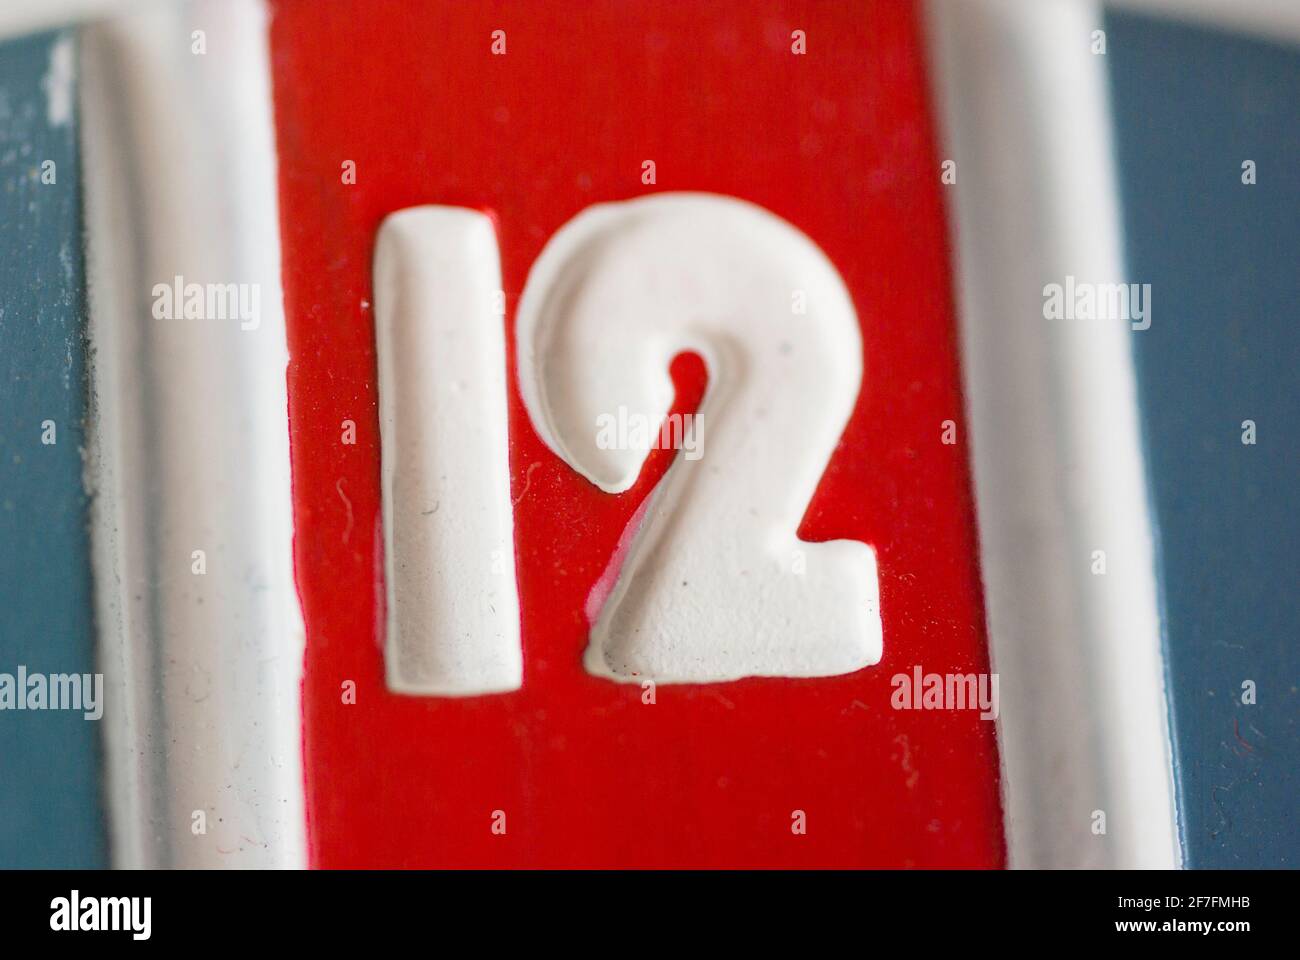 A close up of the number Twelve / 12 at the top of a red white and blue clock face, Stock Photo